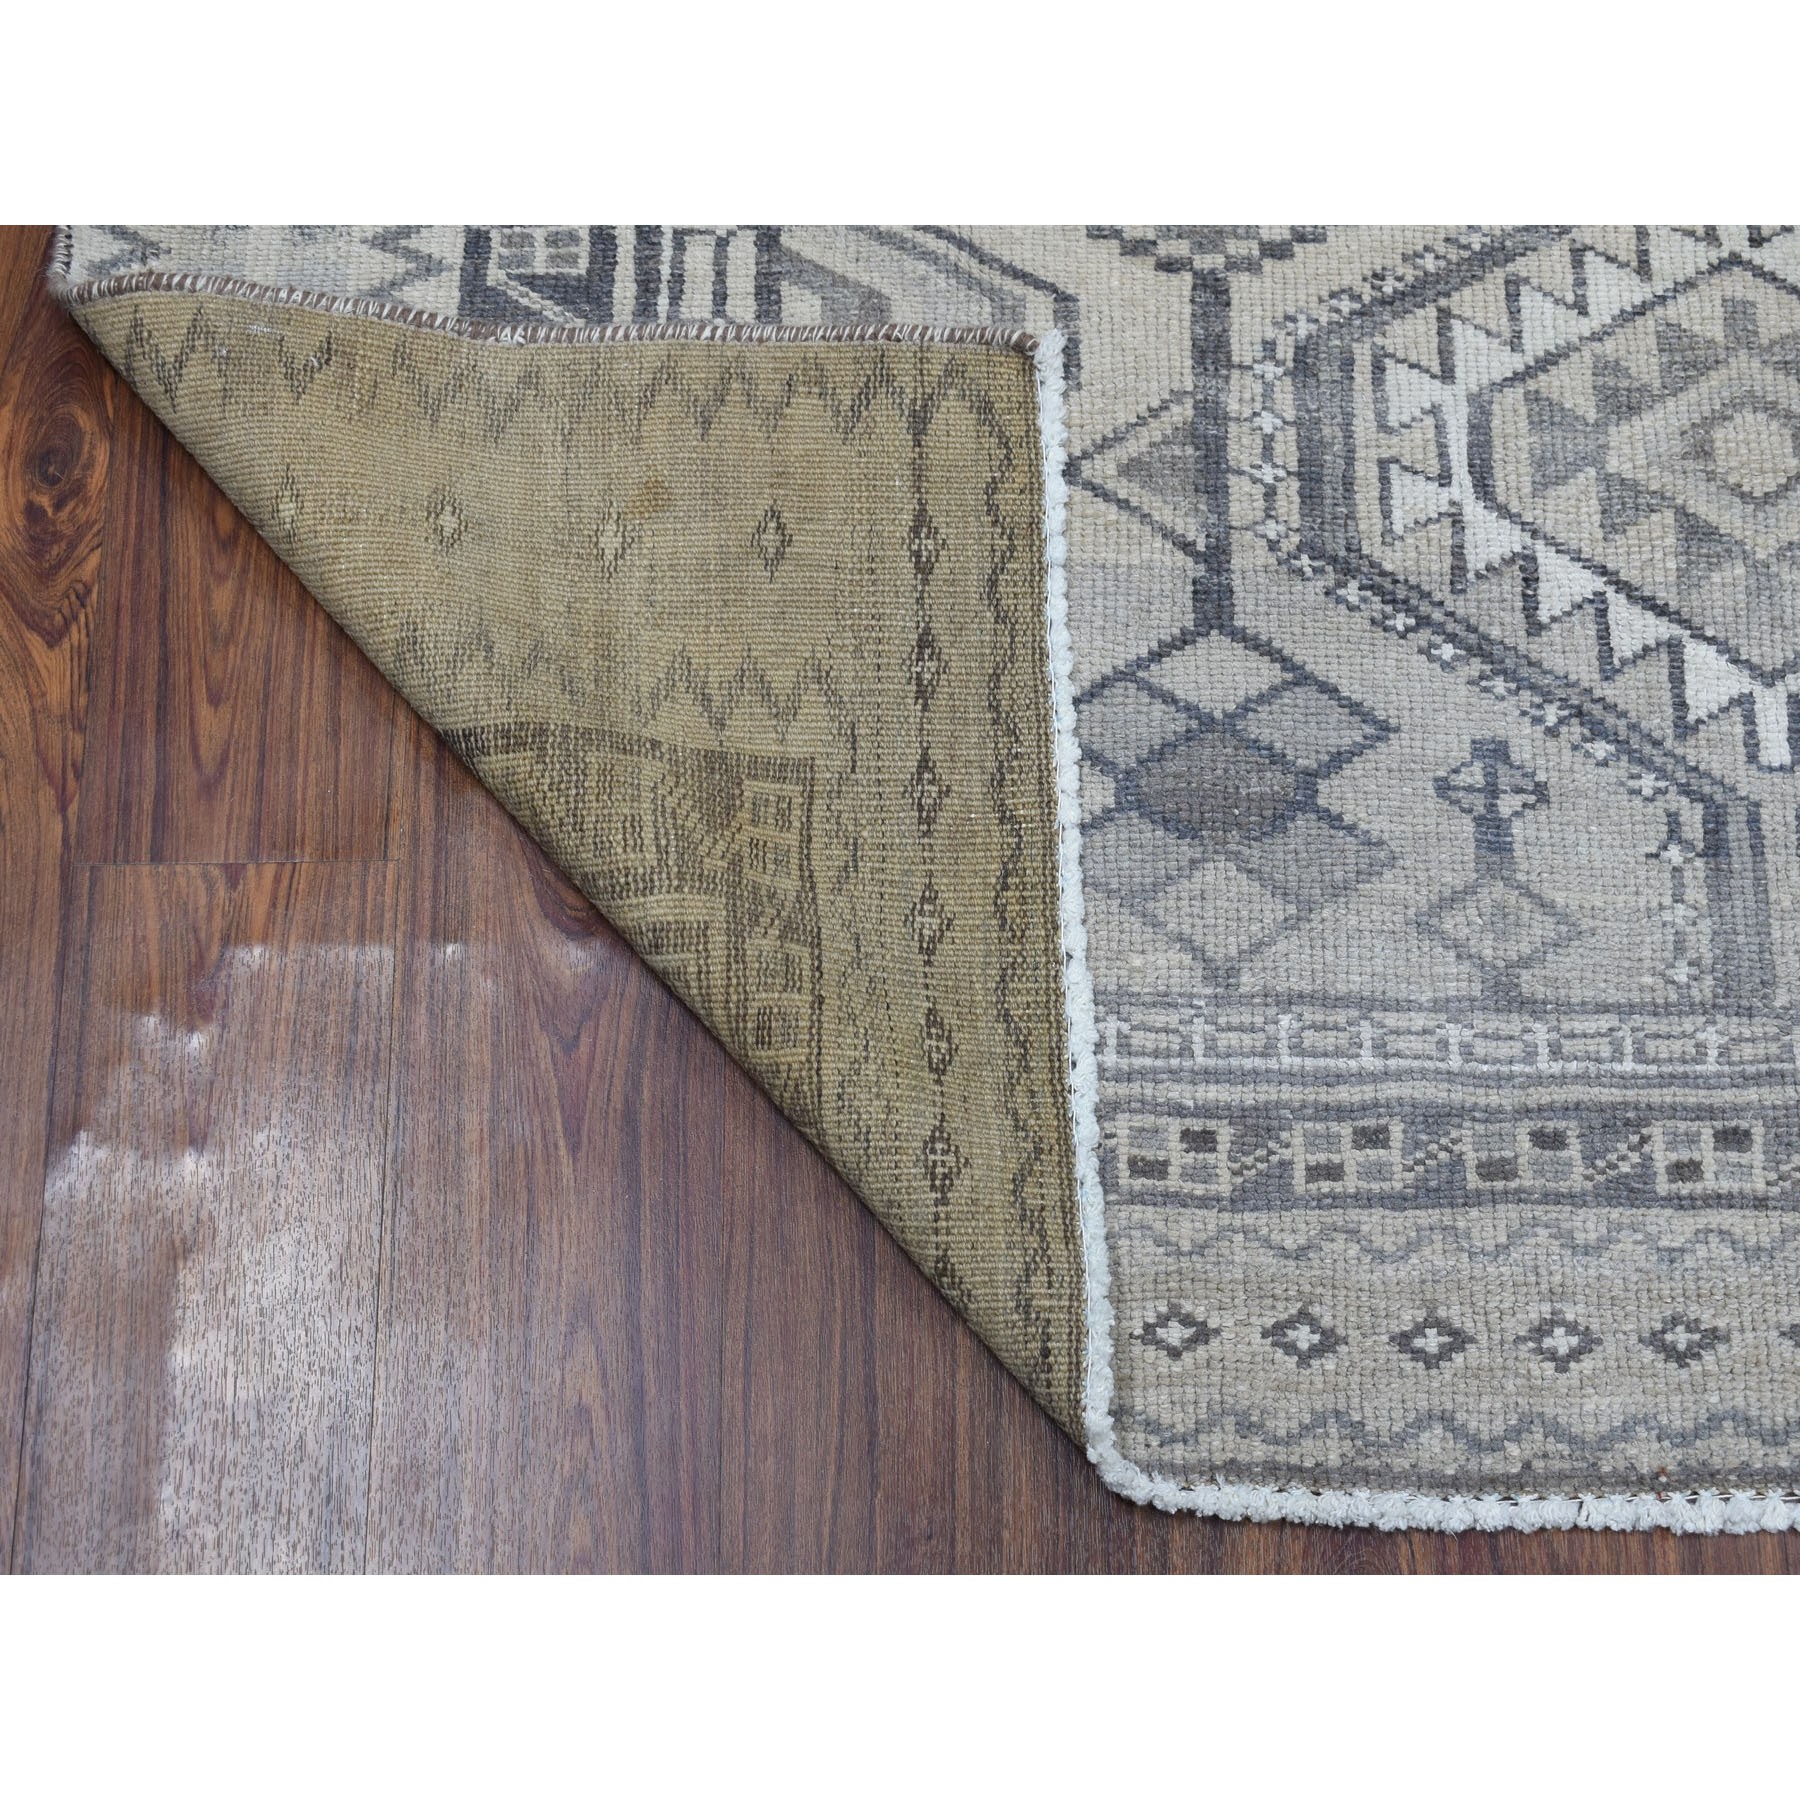 5-5 x8-4   Vintage And Worn Down Distressed Colors Persian Shiraz Hand Knotted Bohemian Rug 